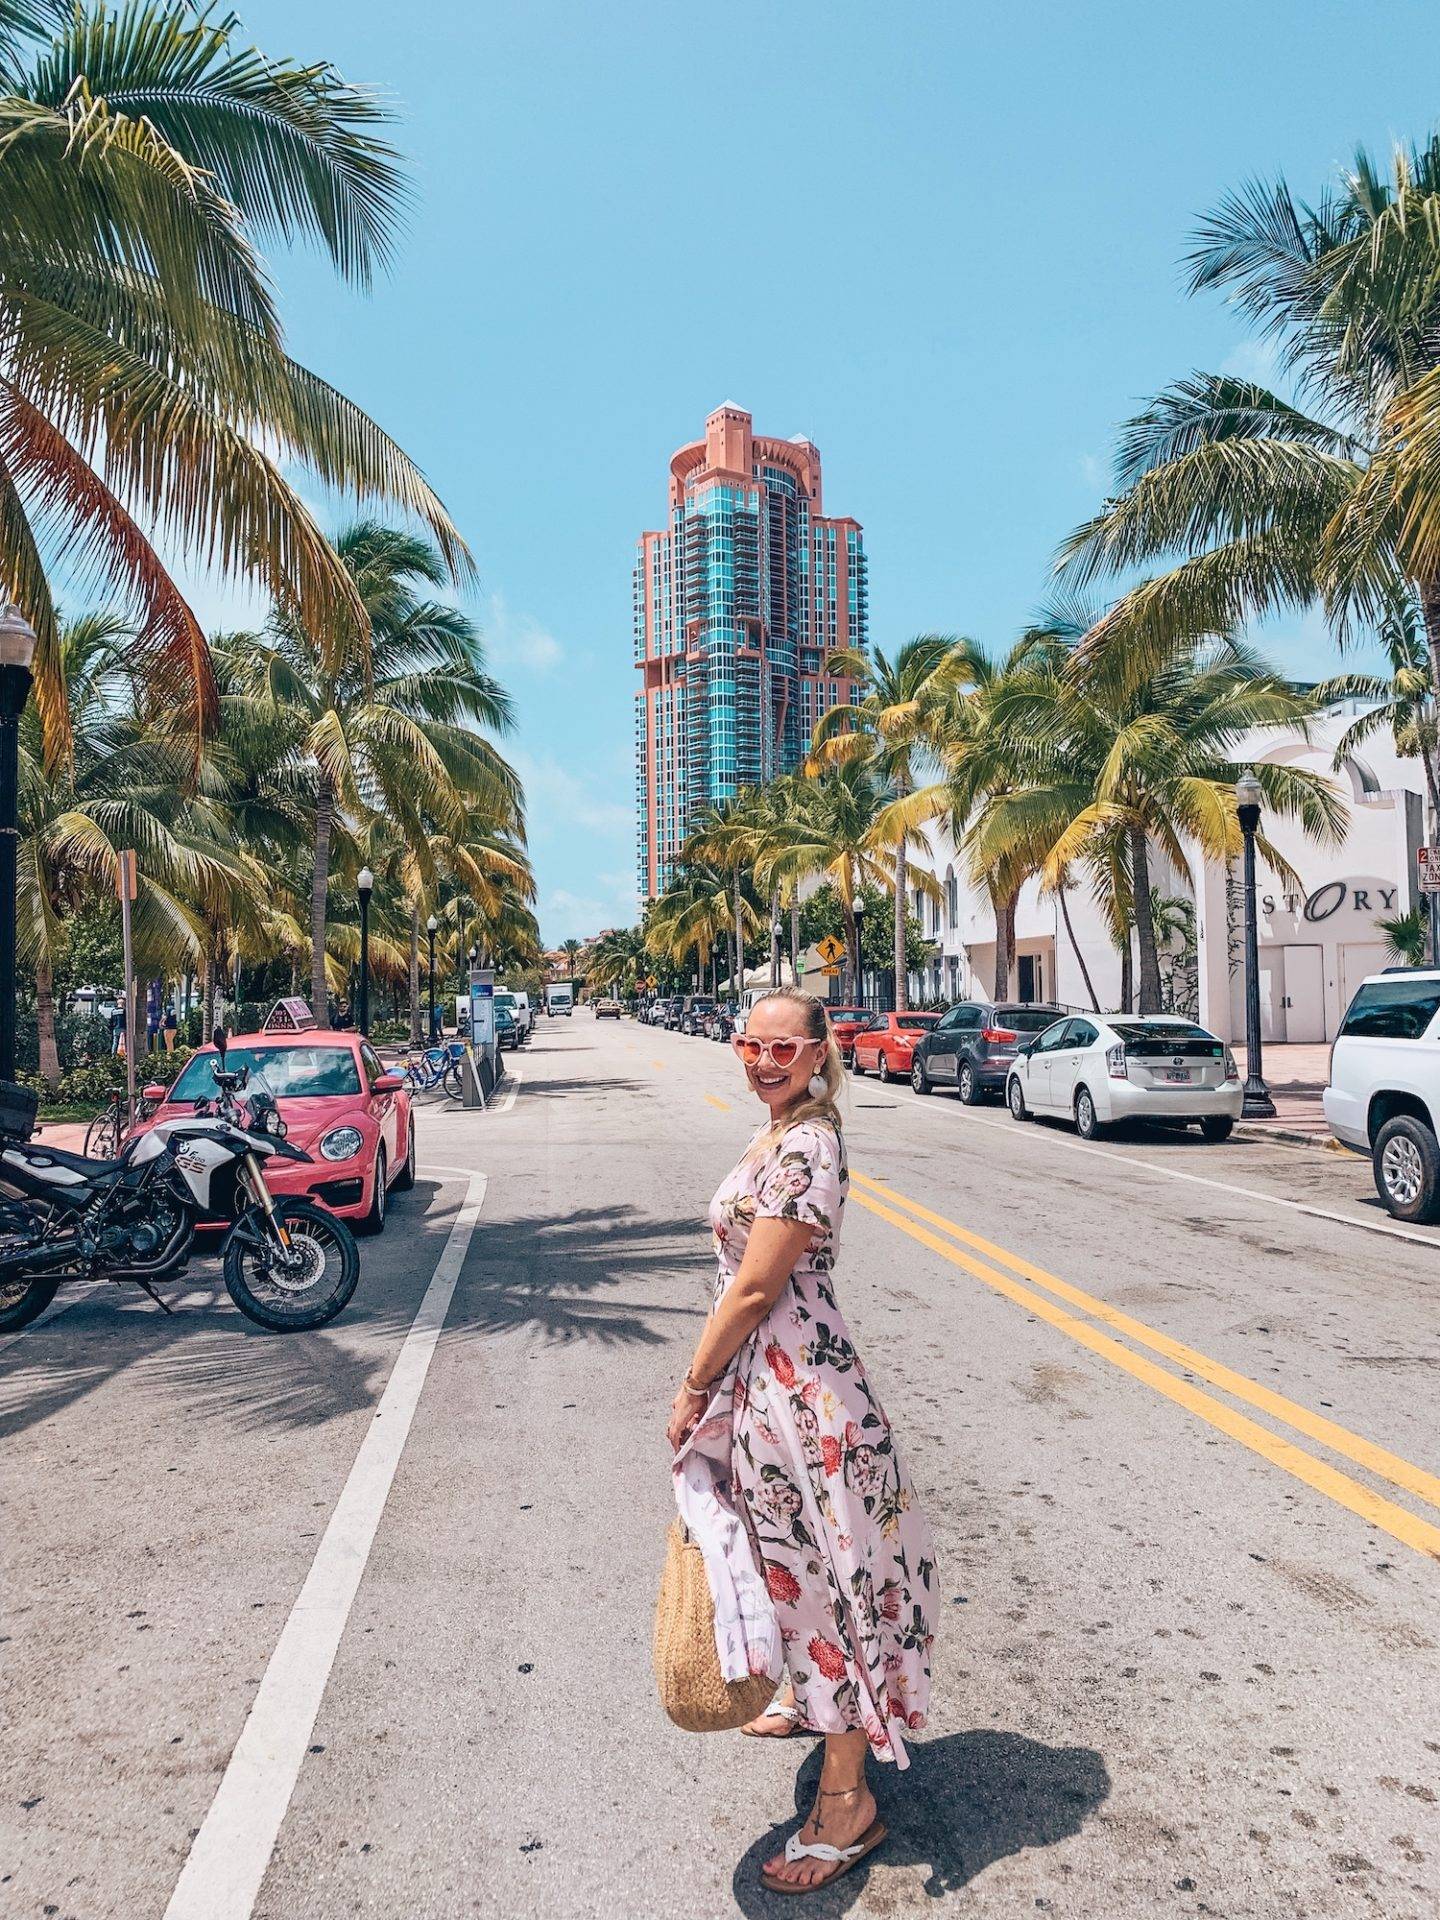 Everything you need to know to plan your trip to Miami, Florida! This guide is chock full of all of the best things to do in Miami to ensure you have the best possible trip ever. It includes everything from what to see, do, eat, drink, and where to shop while you’re there. From family friendly Miami attractions to adults only events, you don’t want to miss this comprehensive guide to the top things to do in Miami.

Pictured here: Go shopping along Ocean Drive